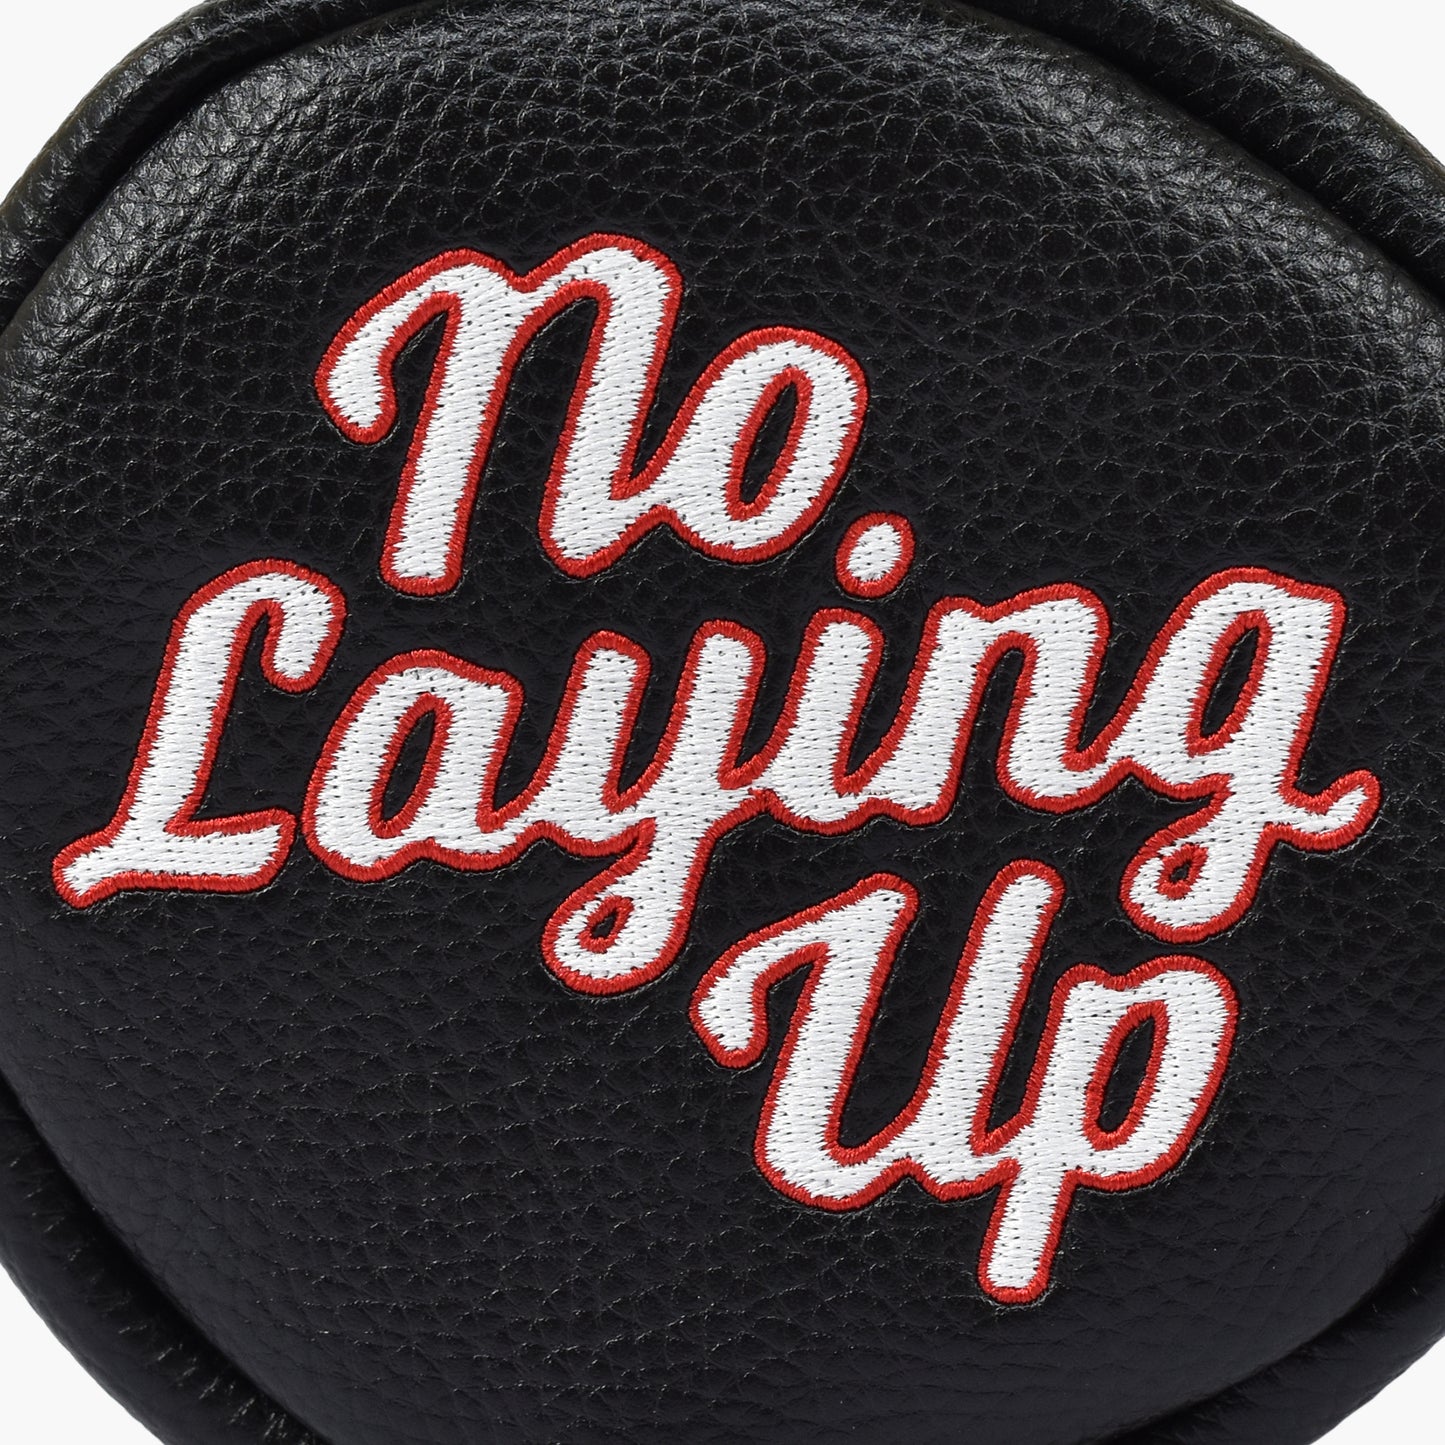 No Laying Up Barrel Fairway Wood Headcover | Black w/ White and Red